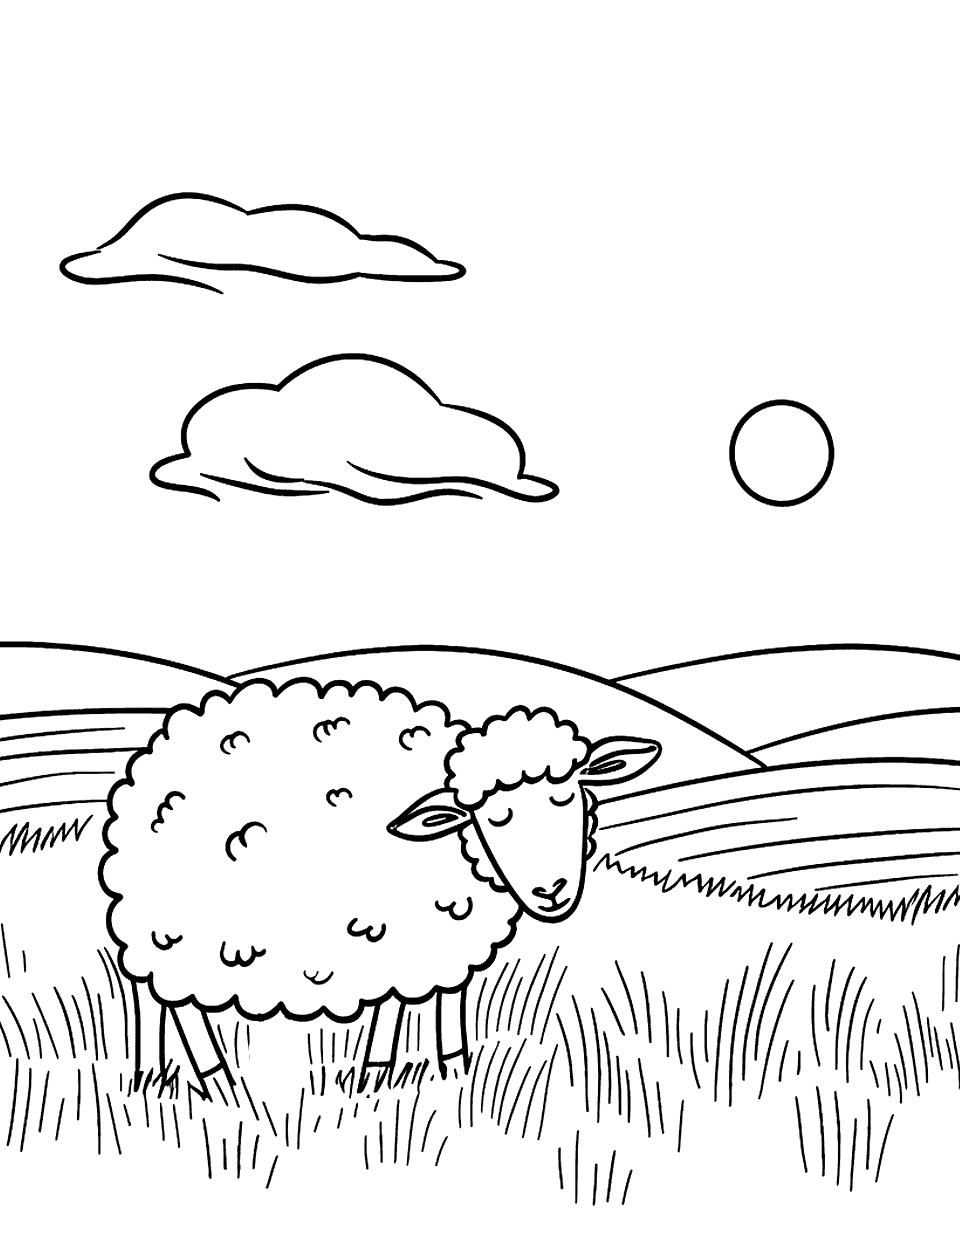 Sleepy Sheep at Dusk Coloring Page - A sheep settling down to sleep as dusk settles over the farm landscape.